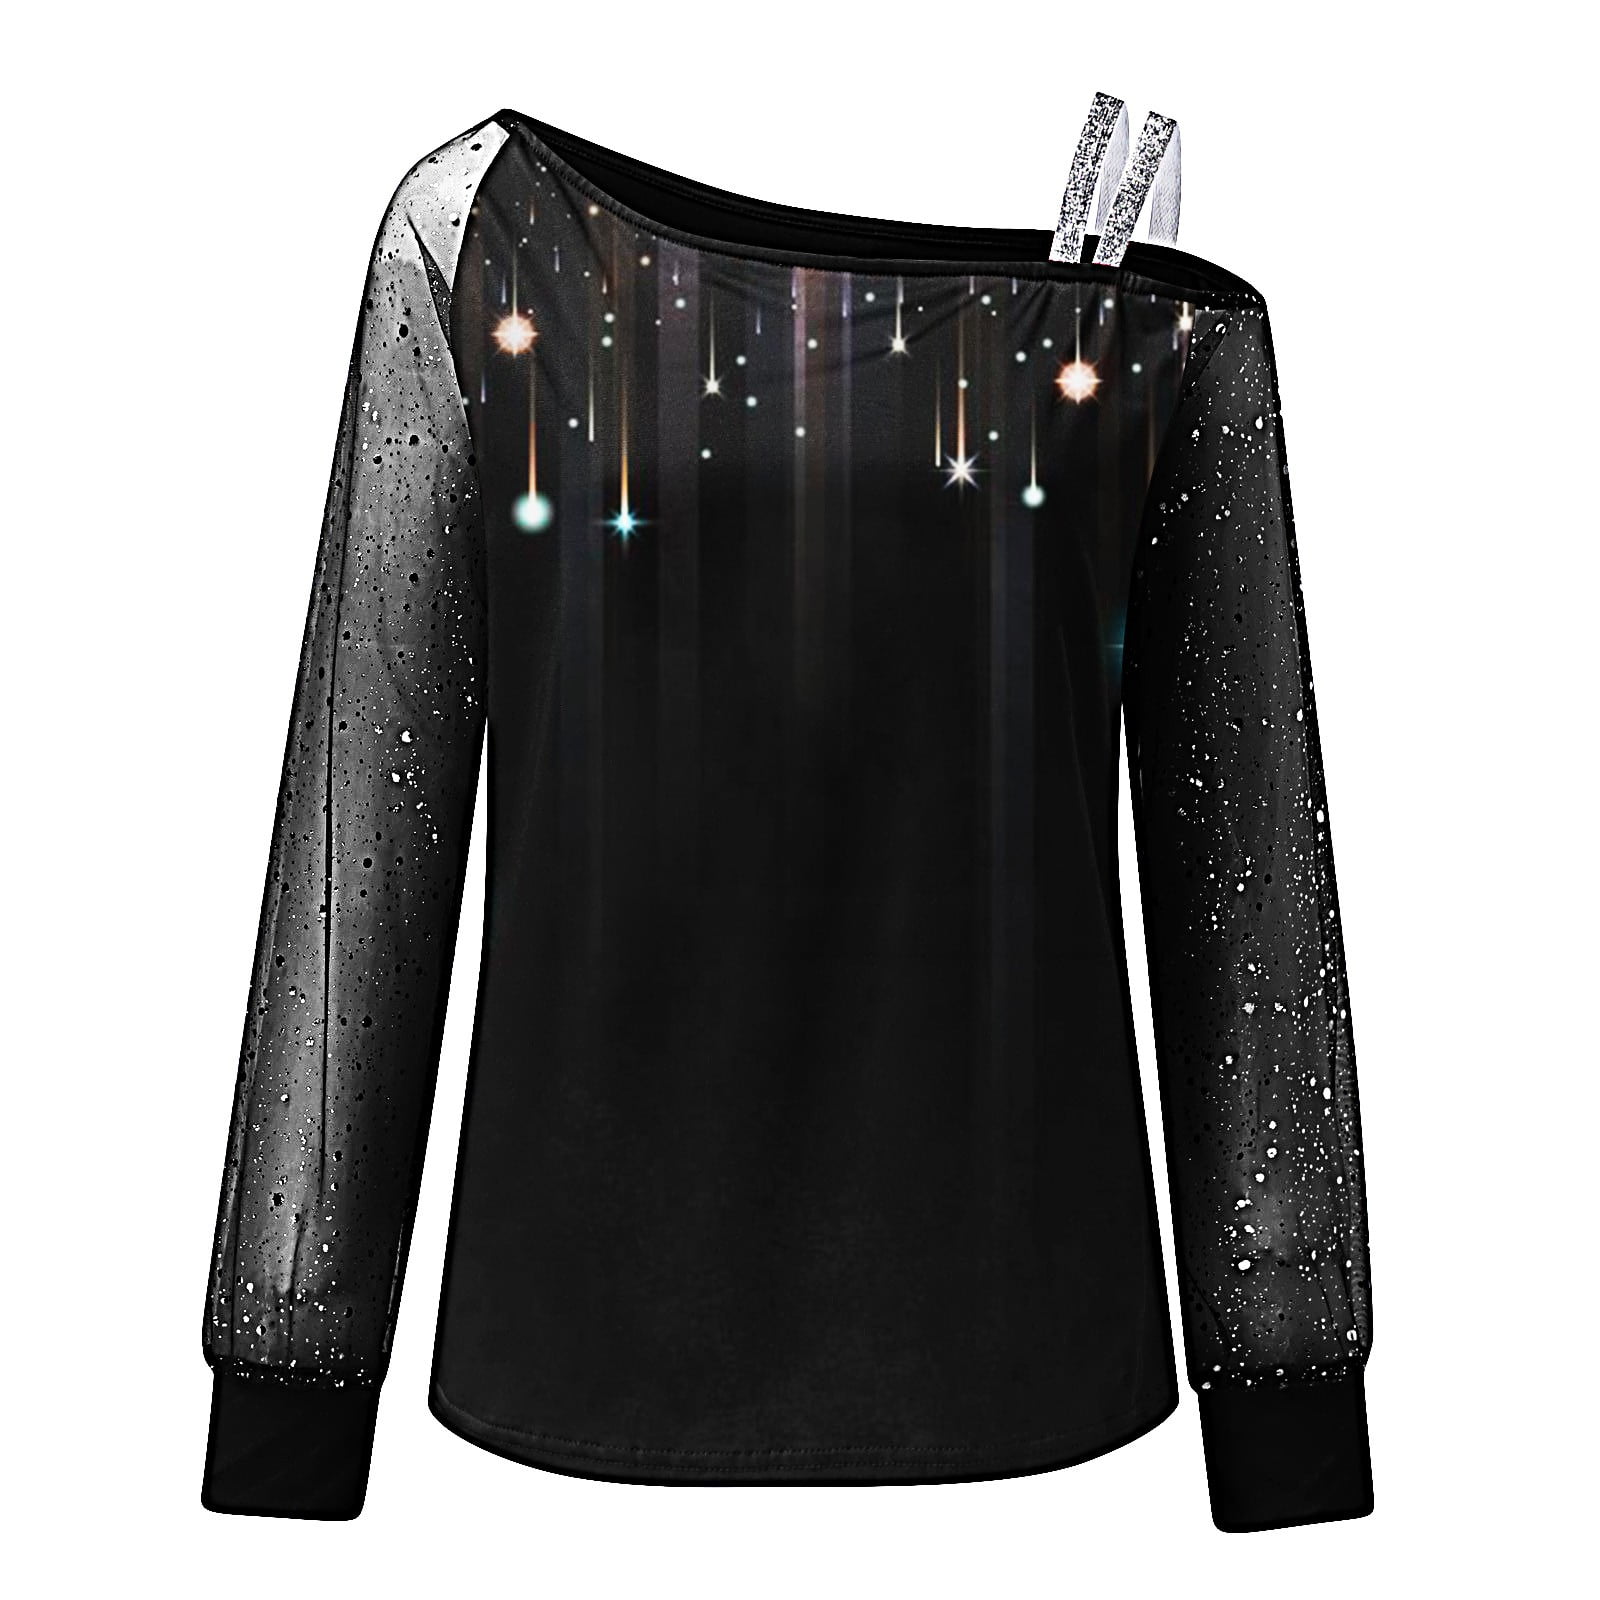 Gubotare New Years Scoop For Shirt Zipper Pullover Women Srtipe Cold Mesh Womens Blouse Sleeve Casual Shoulder Tops M Eve Long T-Shirt,Silver Neck